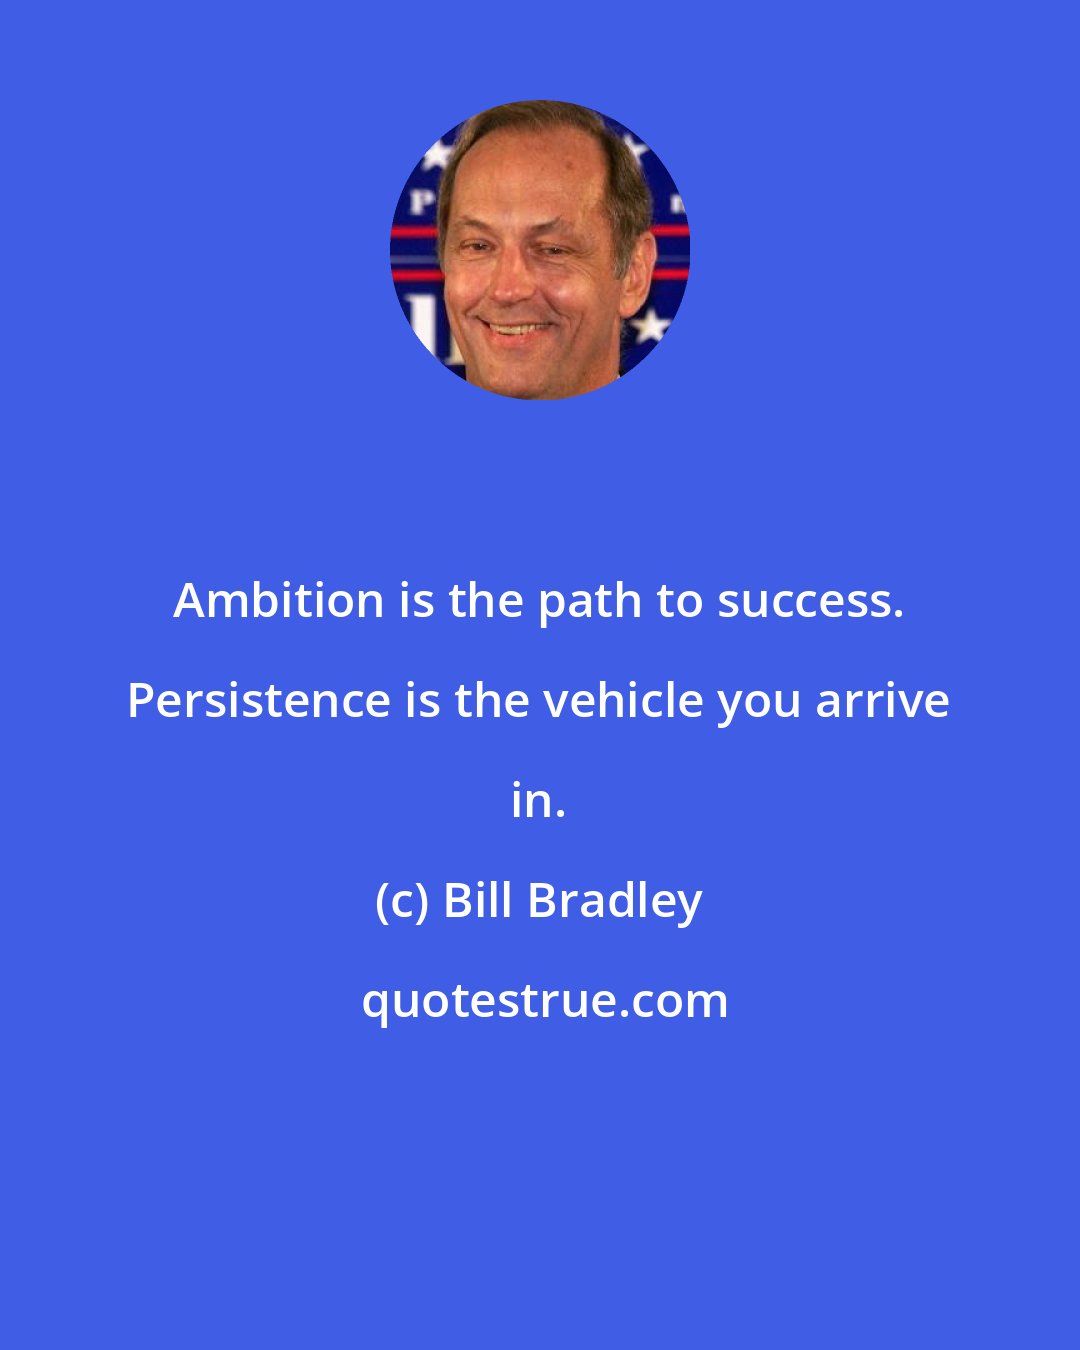 Bill Bradley: Ambition is the path to success. Persistence is the vehicle you arrive in.